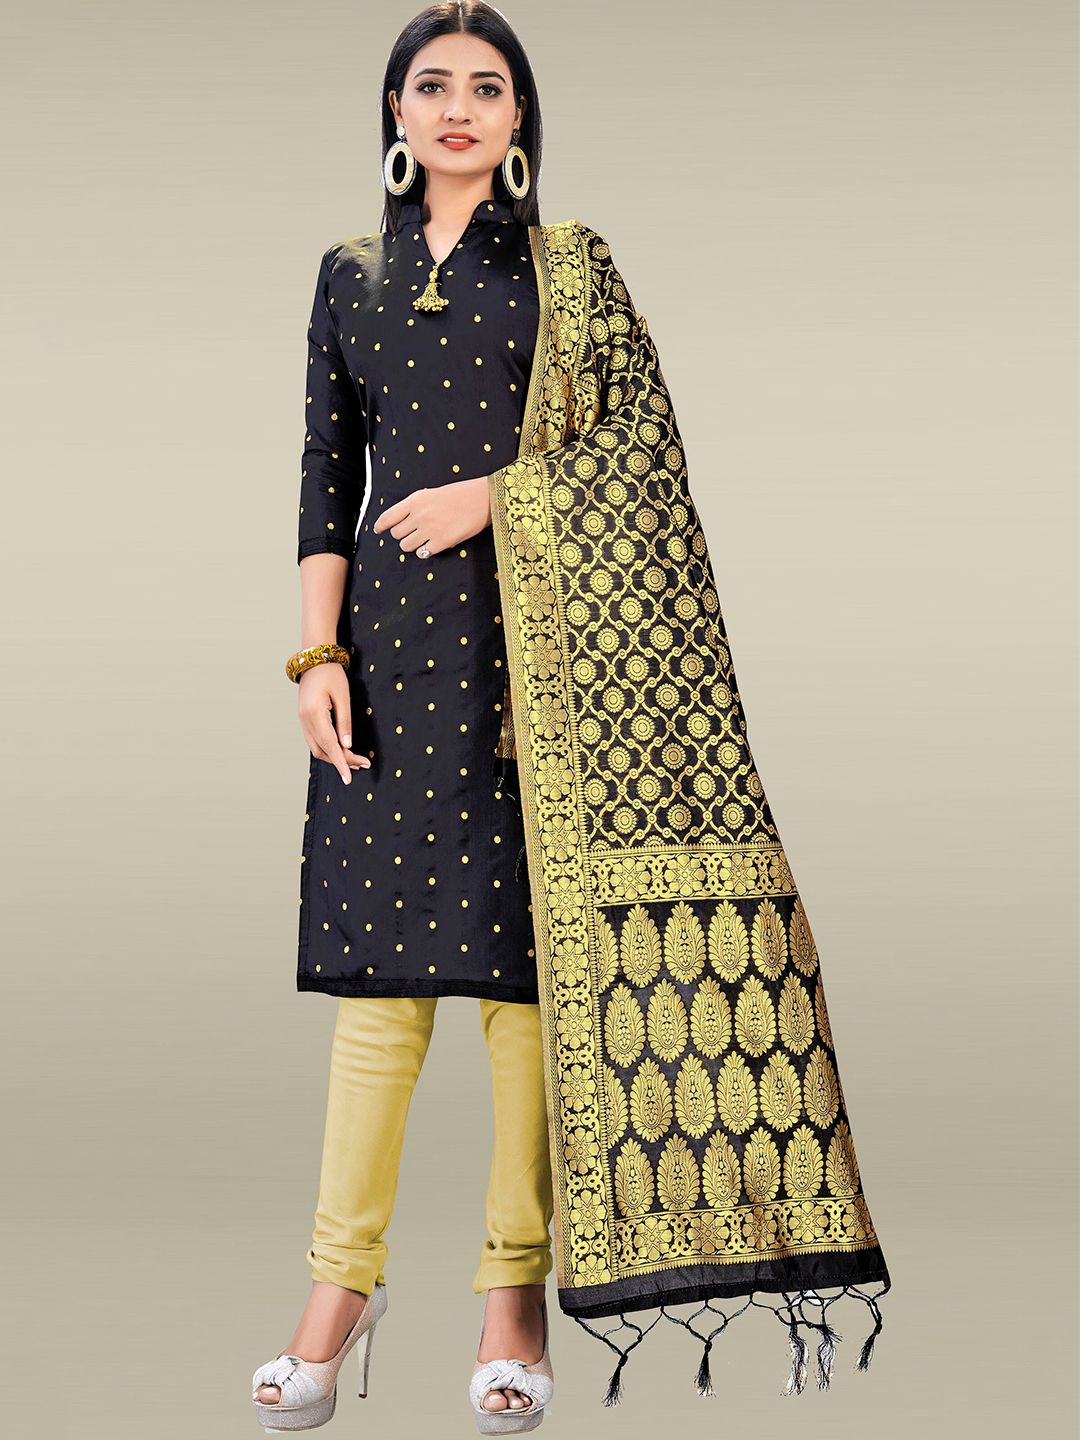 Mitera Black & Gold-Toned Unstitched Dress Material Price in India